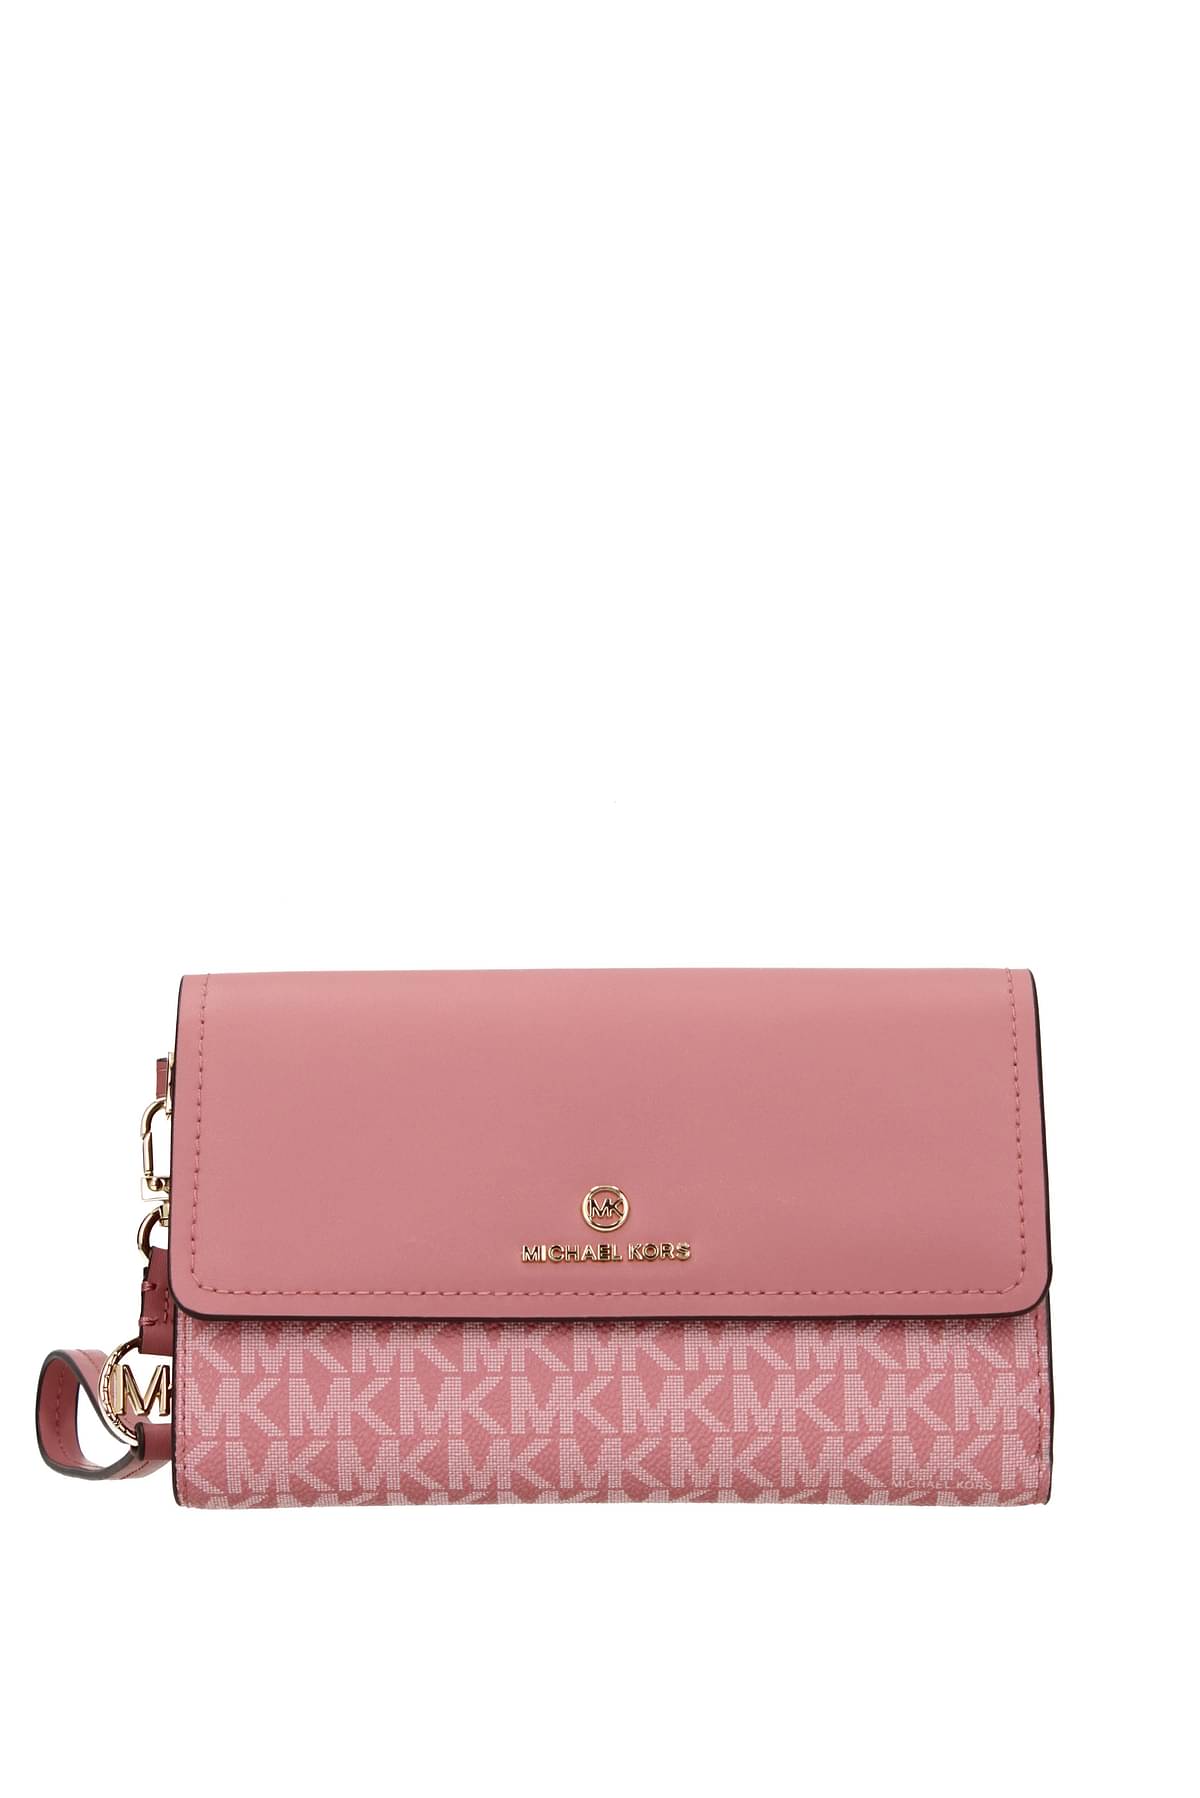 MICHAEL Michael Kors Women's Pink Tote Bags with Cash Back